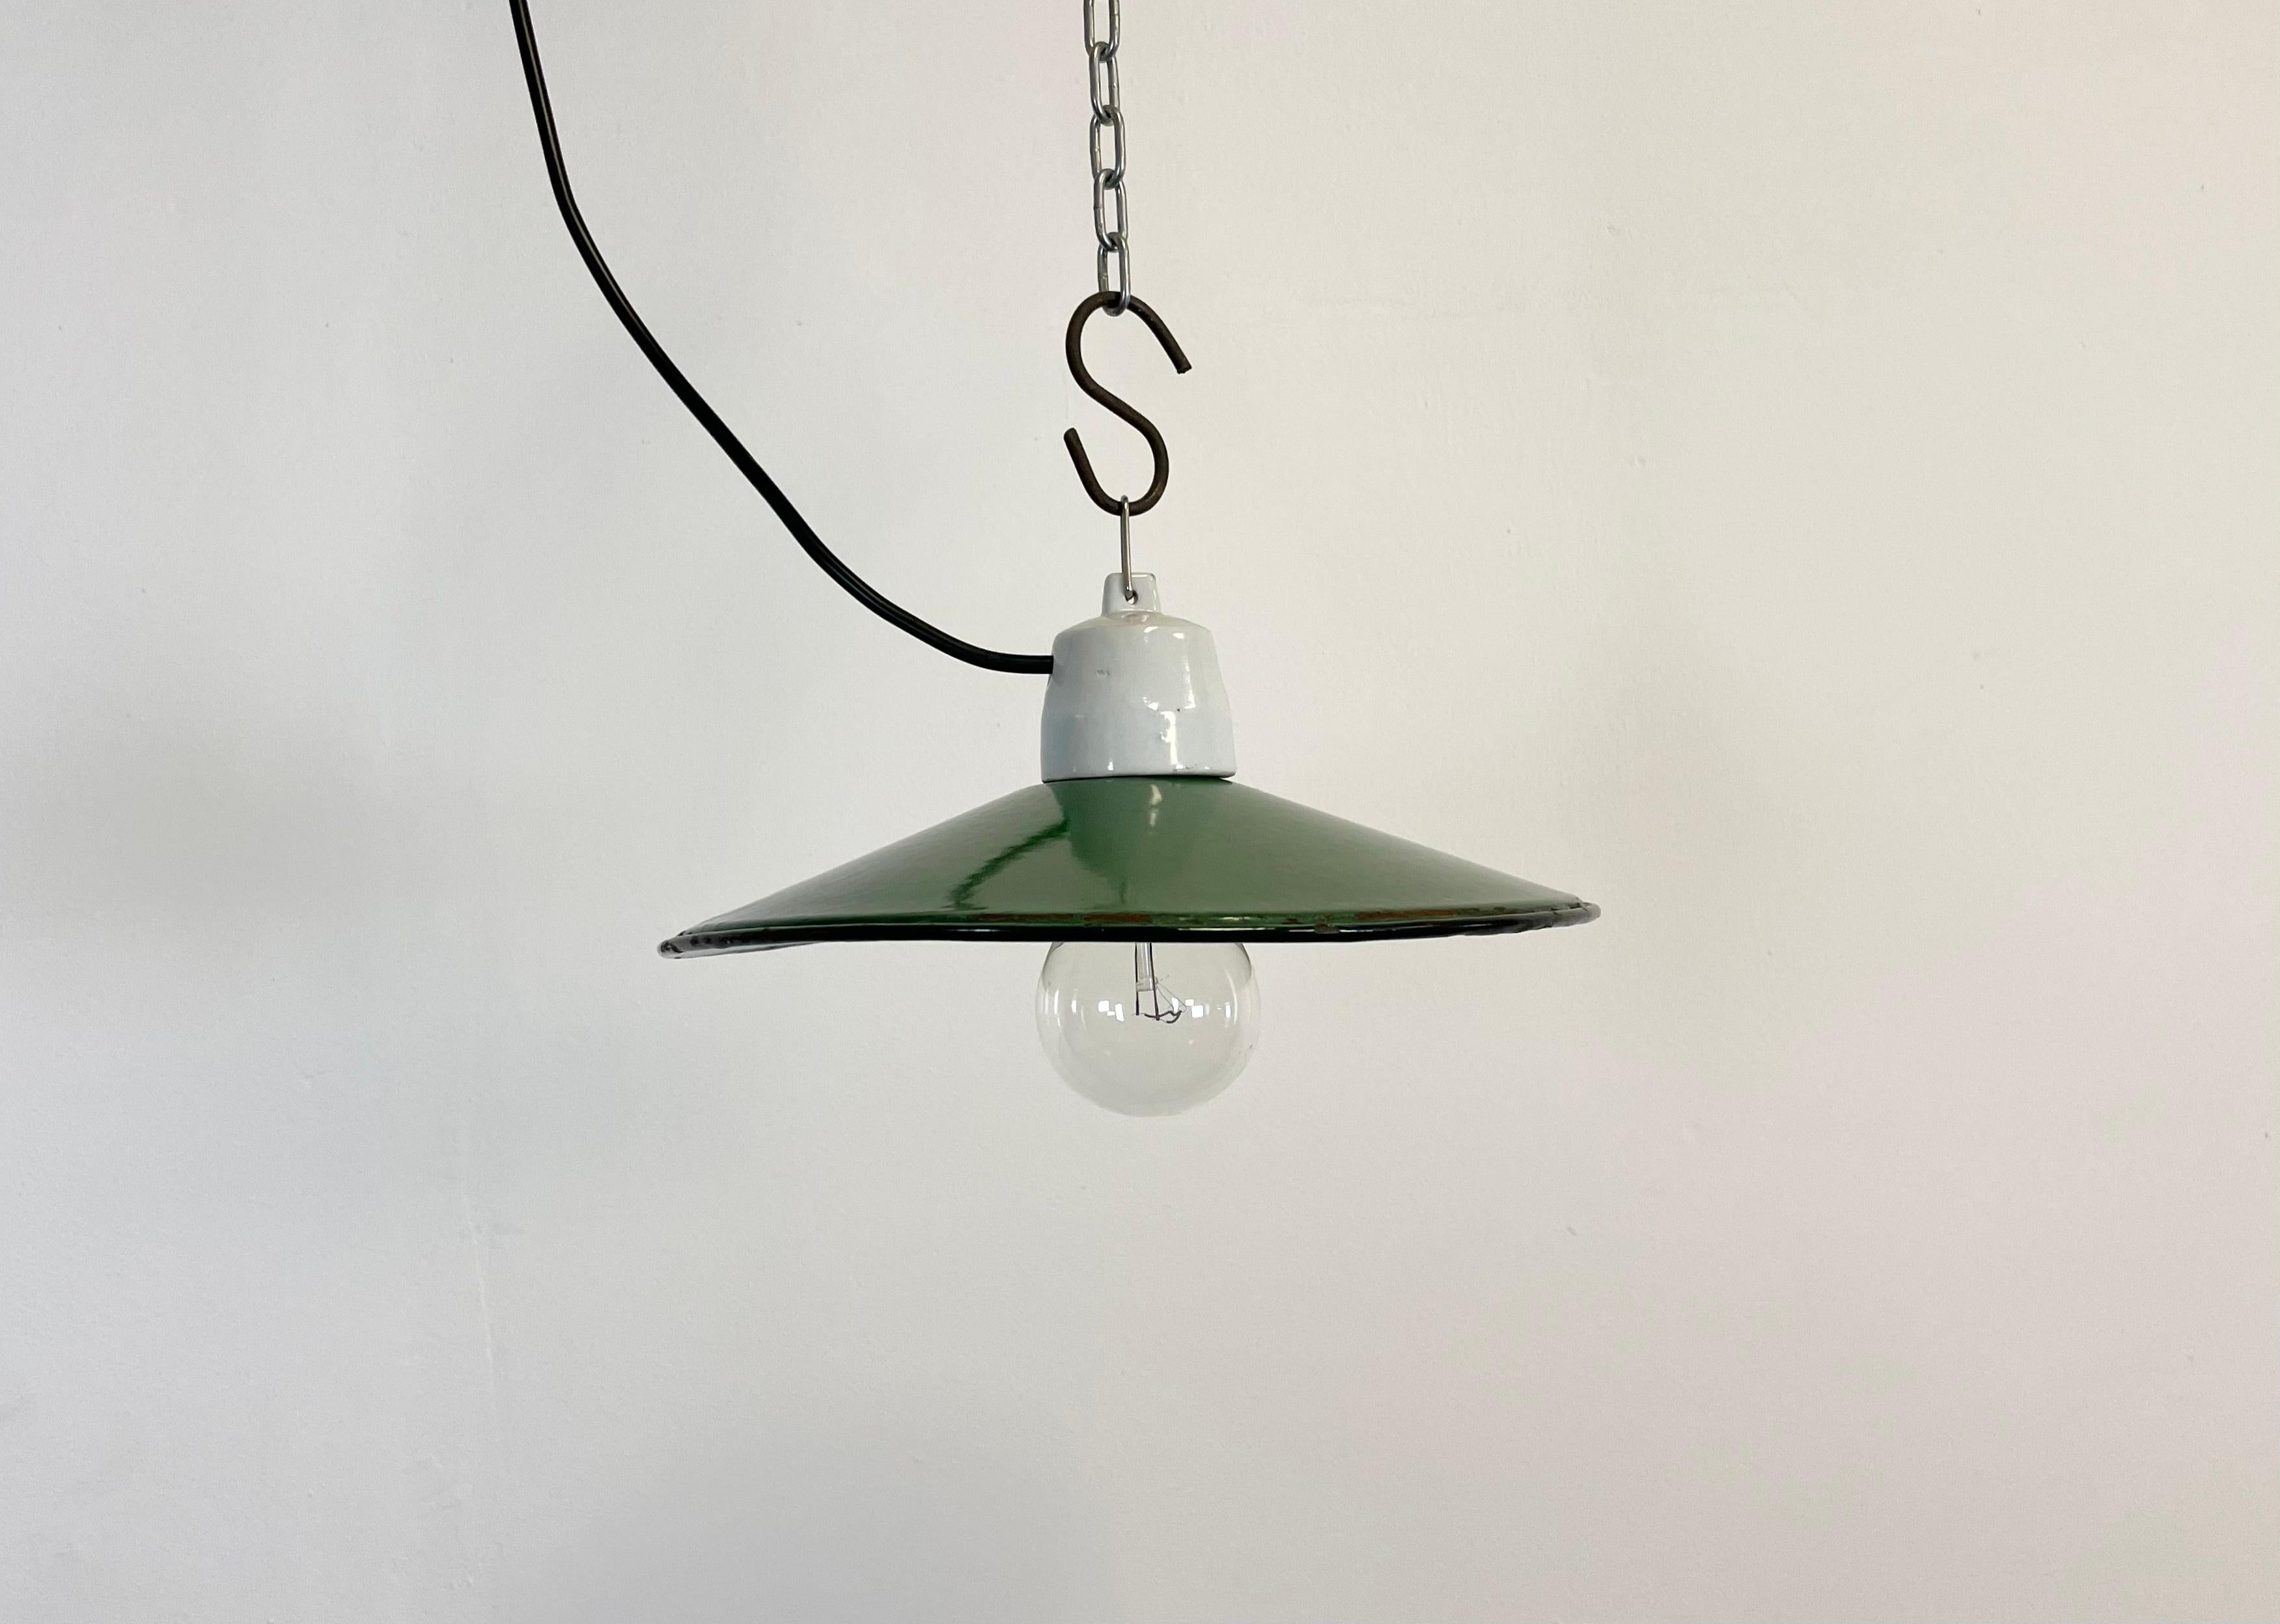 Vintage industrial enamel pendant lamp made in Poland during the 1970s. It features a green enamel shade with white enamel interior and porcelain top. The socket requires E 27 light bulbs. The weight of the lamp is 0,5 kg. New wire.